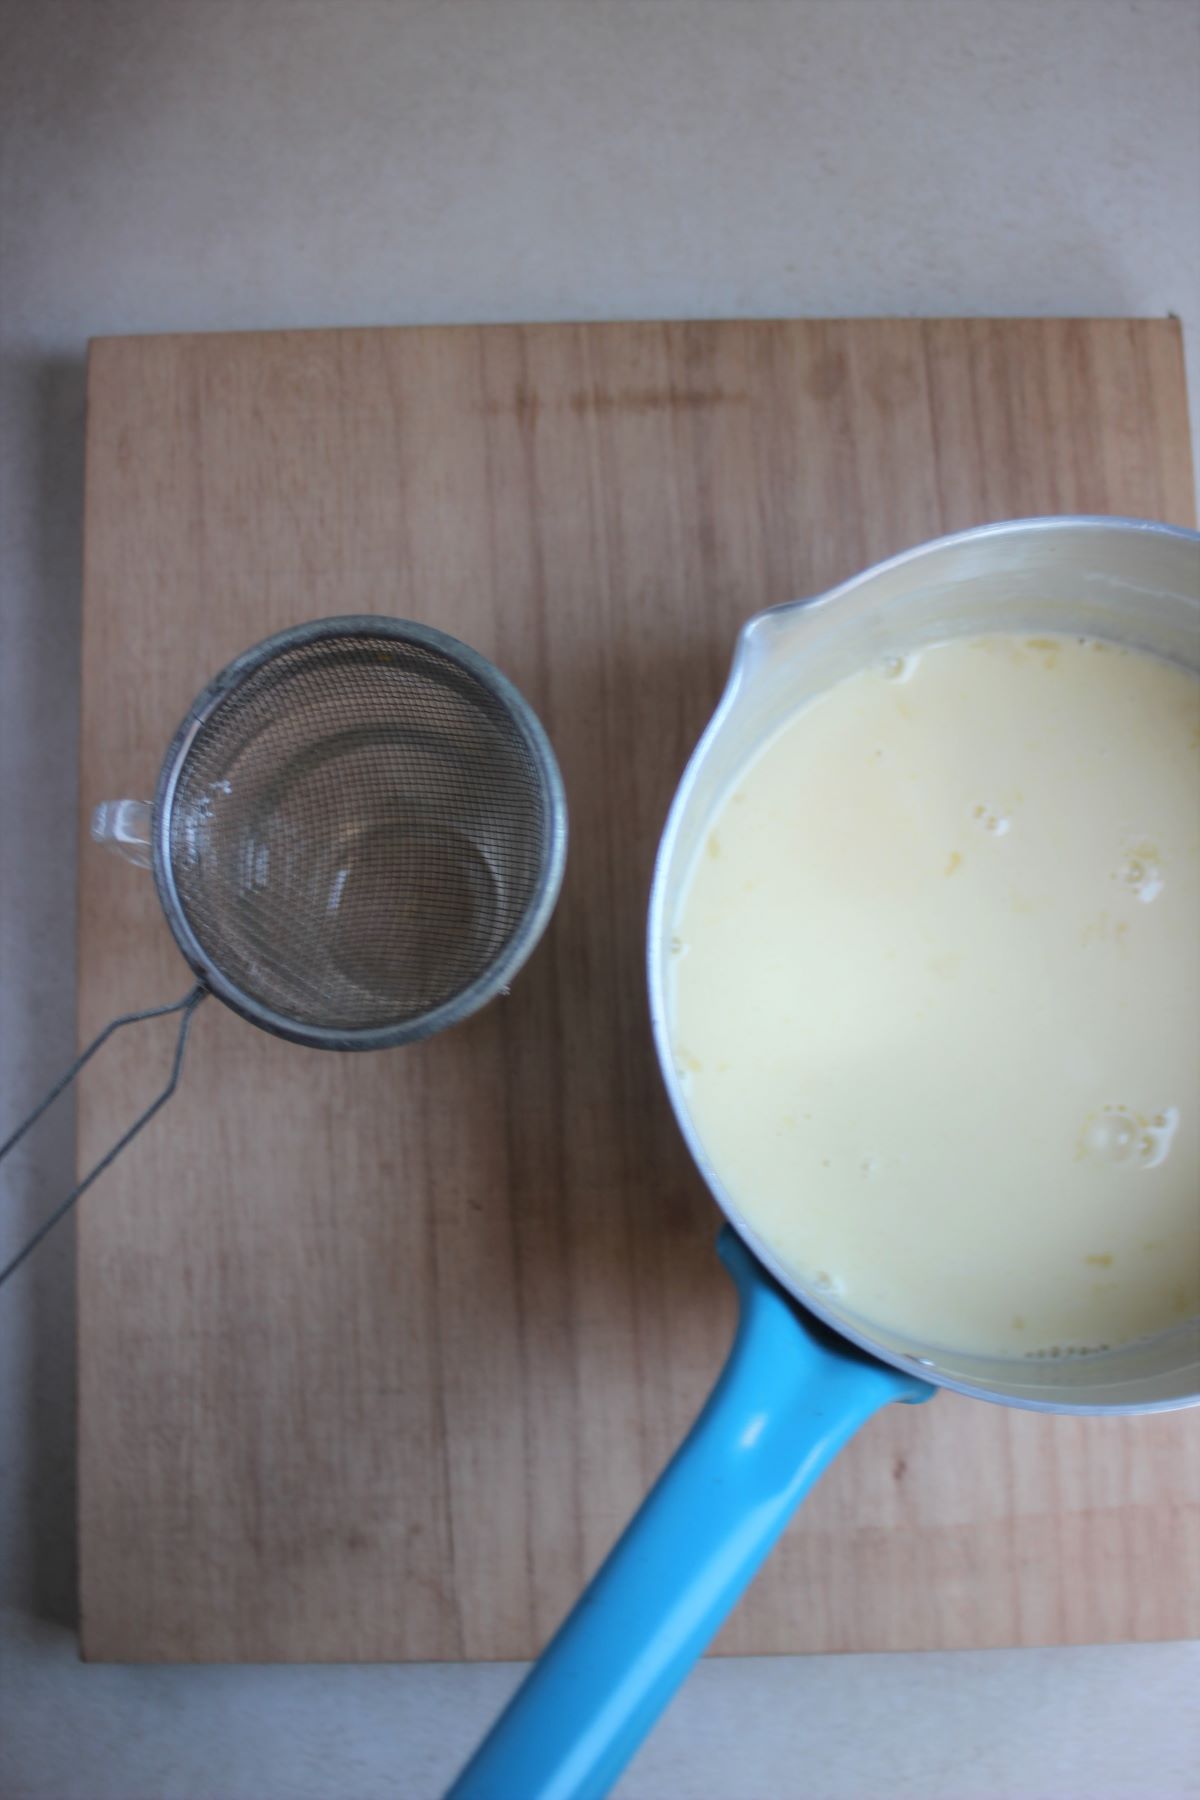 Deep saucepan with milk and a strainer on the side, on a wooden board.